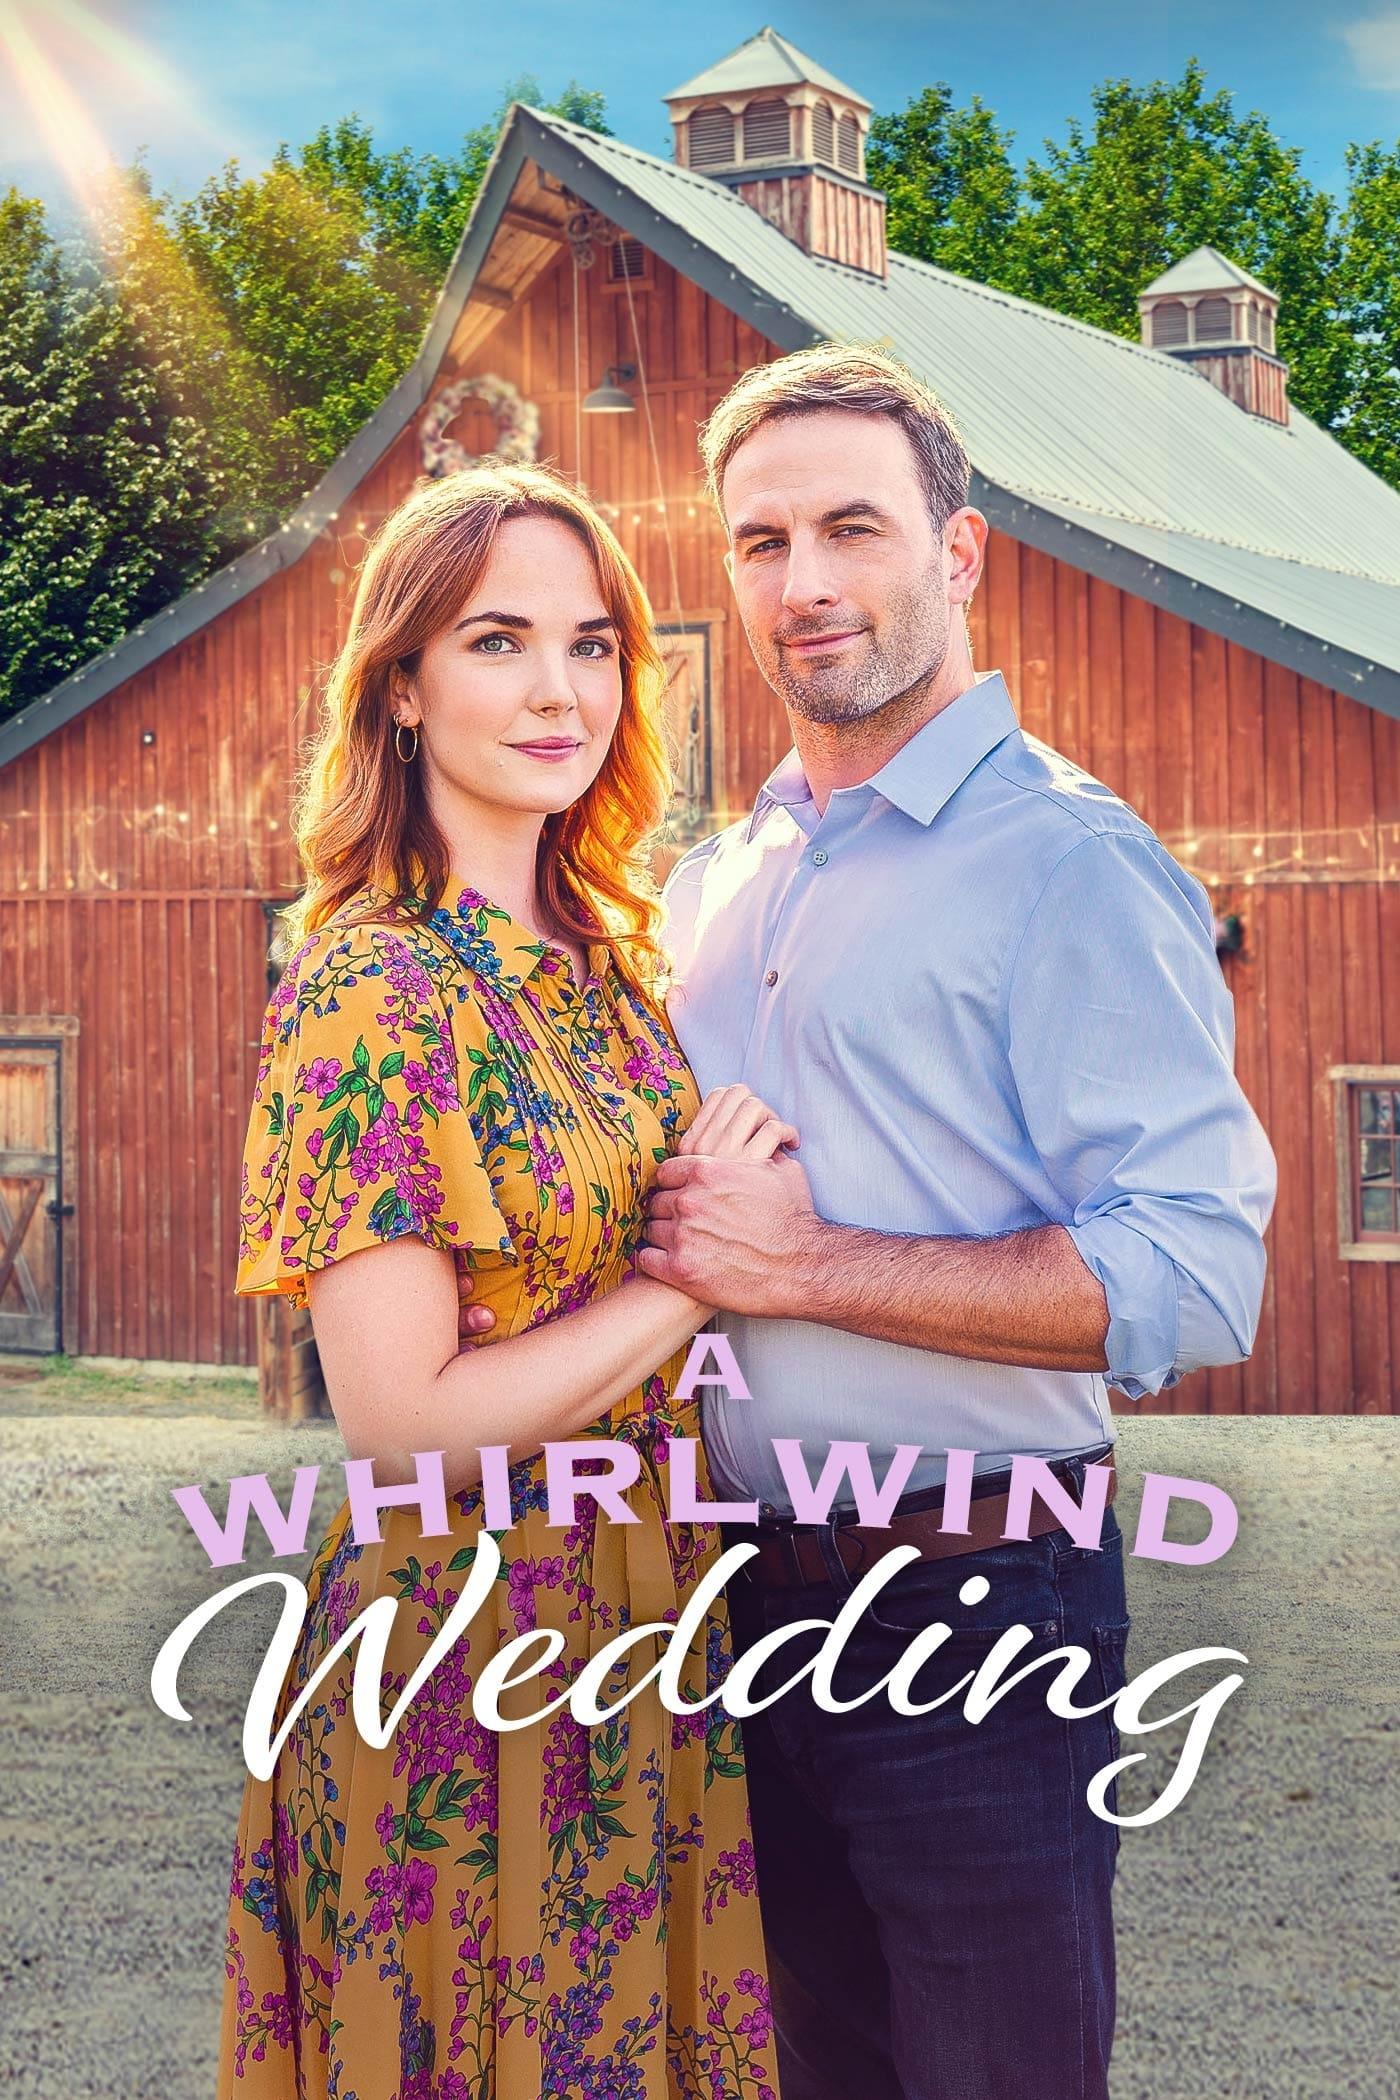 A Whirlwind Wedding poster